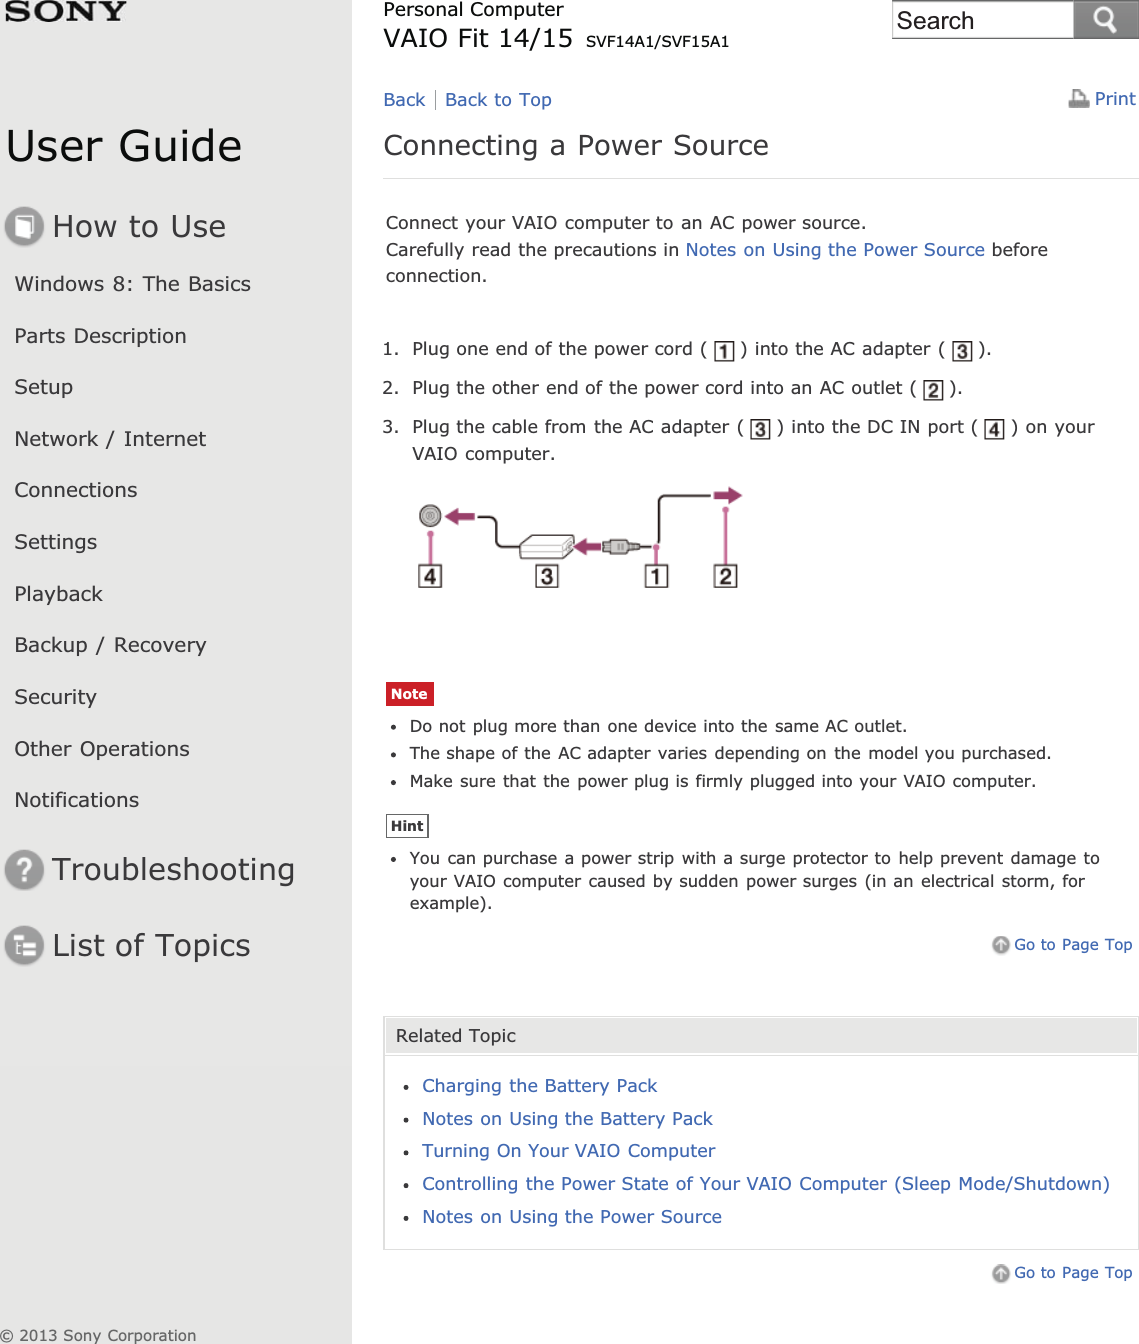 User GuideHow to UseWindows 8: The BasicsParts DescriptionSetupNetwork / InternetConnectionsSettingsPlaybackBackup / RecoverySecurityOther OperationsNotificationsTroubleshootingList of TopicsPrintPersonal ComputerVAIO Fit 14/15 SVF14A1/SVF15A1Connecting a Power SourceConnect your VAIO computer to an AC power source.Carefully read the precautions in Notes on Using the Power Source beforeconnection.1. Plug one end of the power cord ( ) into the AC adapter ( ).2. Plug the other end of the power cord into an AC outlet ( ).3. Plug the cable from the AC adapter ( ) into the DC IN port ( ) on yourVAIO computer.NoteDo not plug more than one device into the same AC outlet.The shape of the AC adapter varies depending on the model you purchased.Make sure that the power plug is firmly plugged into your VAIO computer.HintYou can purchase a power strip with a surge protector to help prevent damage toyour VAIO computer caused by sudden power surges (in an electrical storm, forexample).Go to Page TopRelated TopicCharging the Battery PackNotes on Using the Battery PackTurning On Your VAIO ComputerControlling the Power State of Your VAIO Computer (Sleep Mode/Shutdown)Notes on Using the Power SourceGo to Page TopBack Back to Top© 2013 Sony CorporationSearch